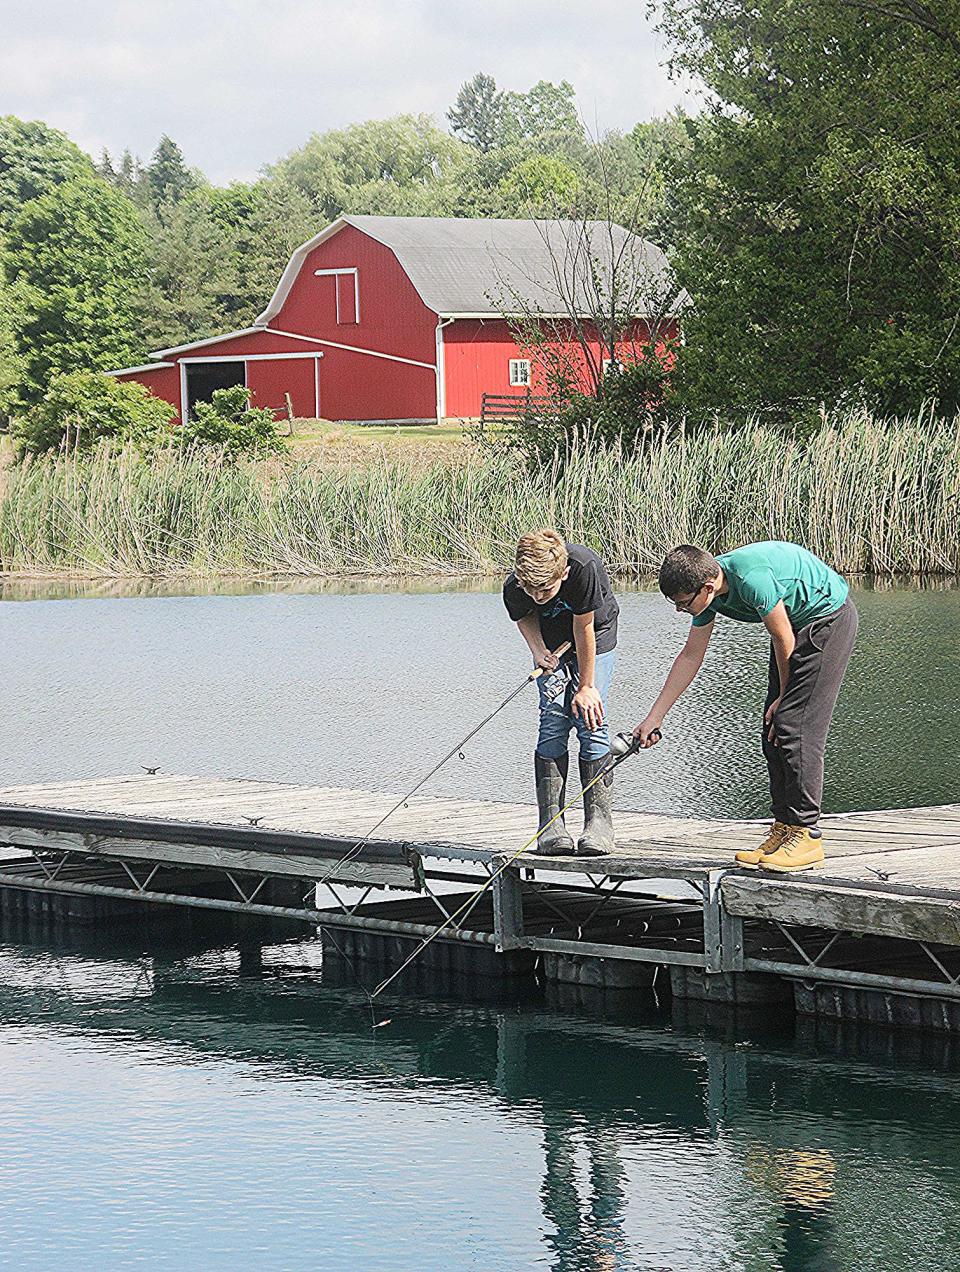 Aiden Sumler and Quentin Craft decompress while fishing at Pathfinder Farms. Students also hike, paint and do other activities as part of the self-care component to the farm's faith-based youth programs.